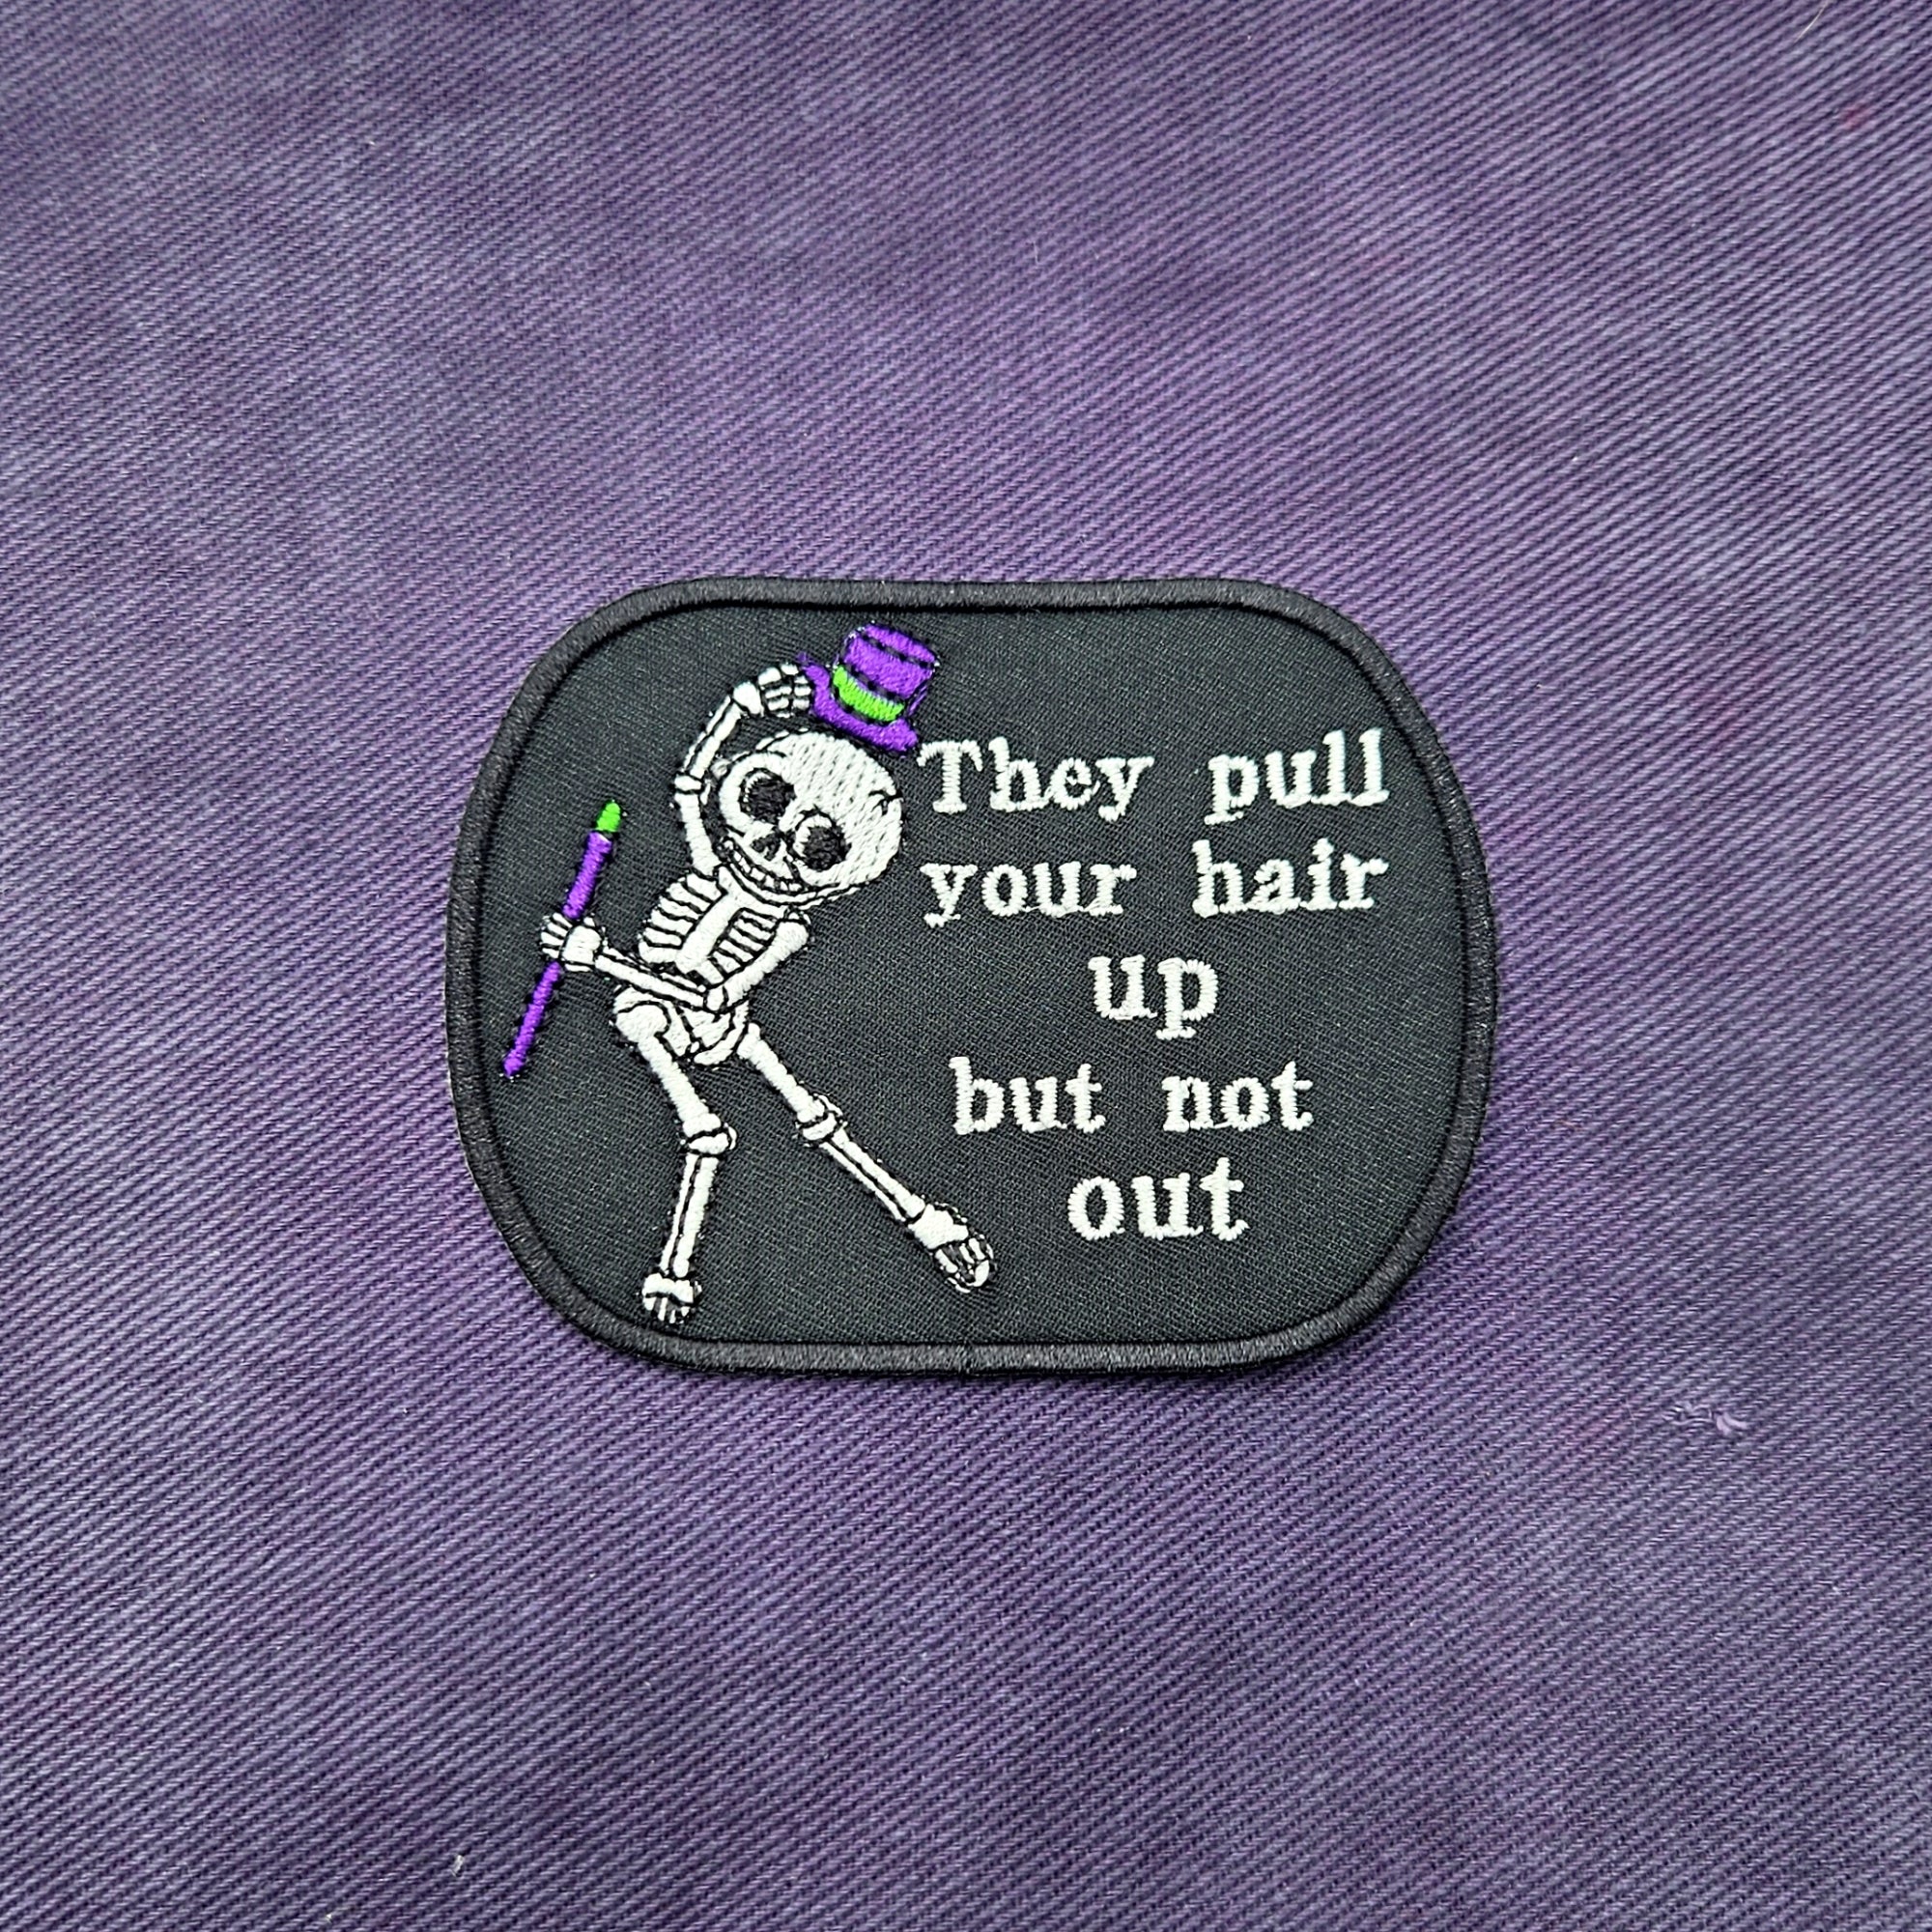 Skeletons Pull Your Hair Patch